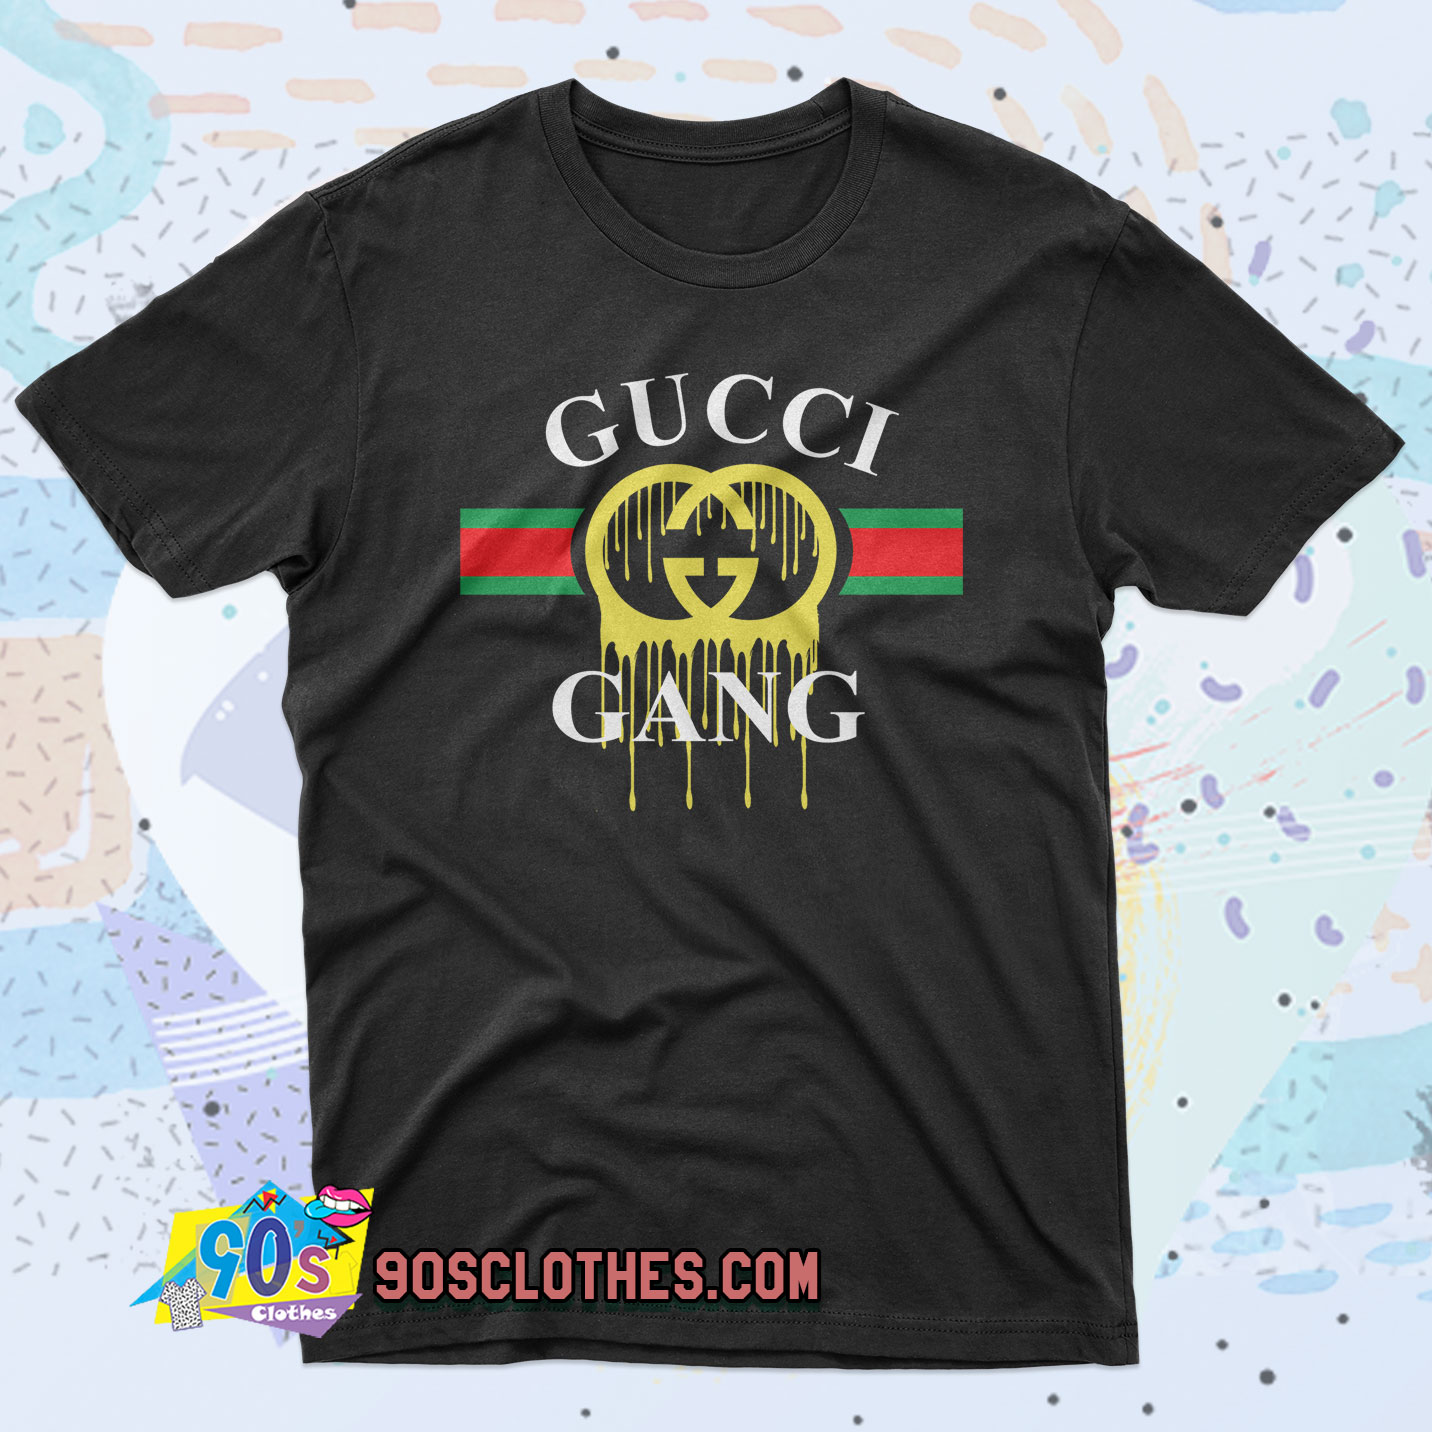 Gucci Gang Dripping 90s T Shirt Style - 90sclothes.com